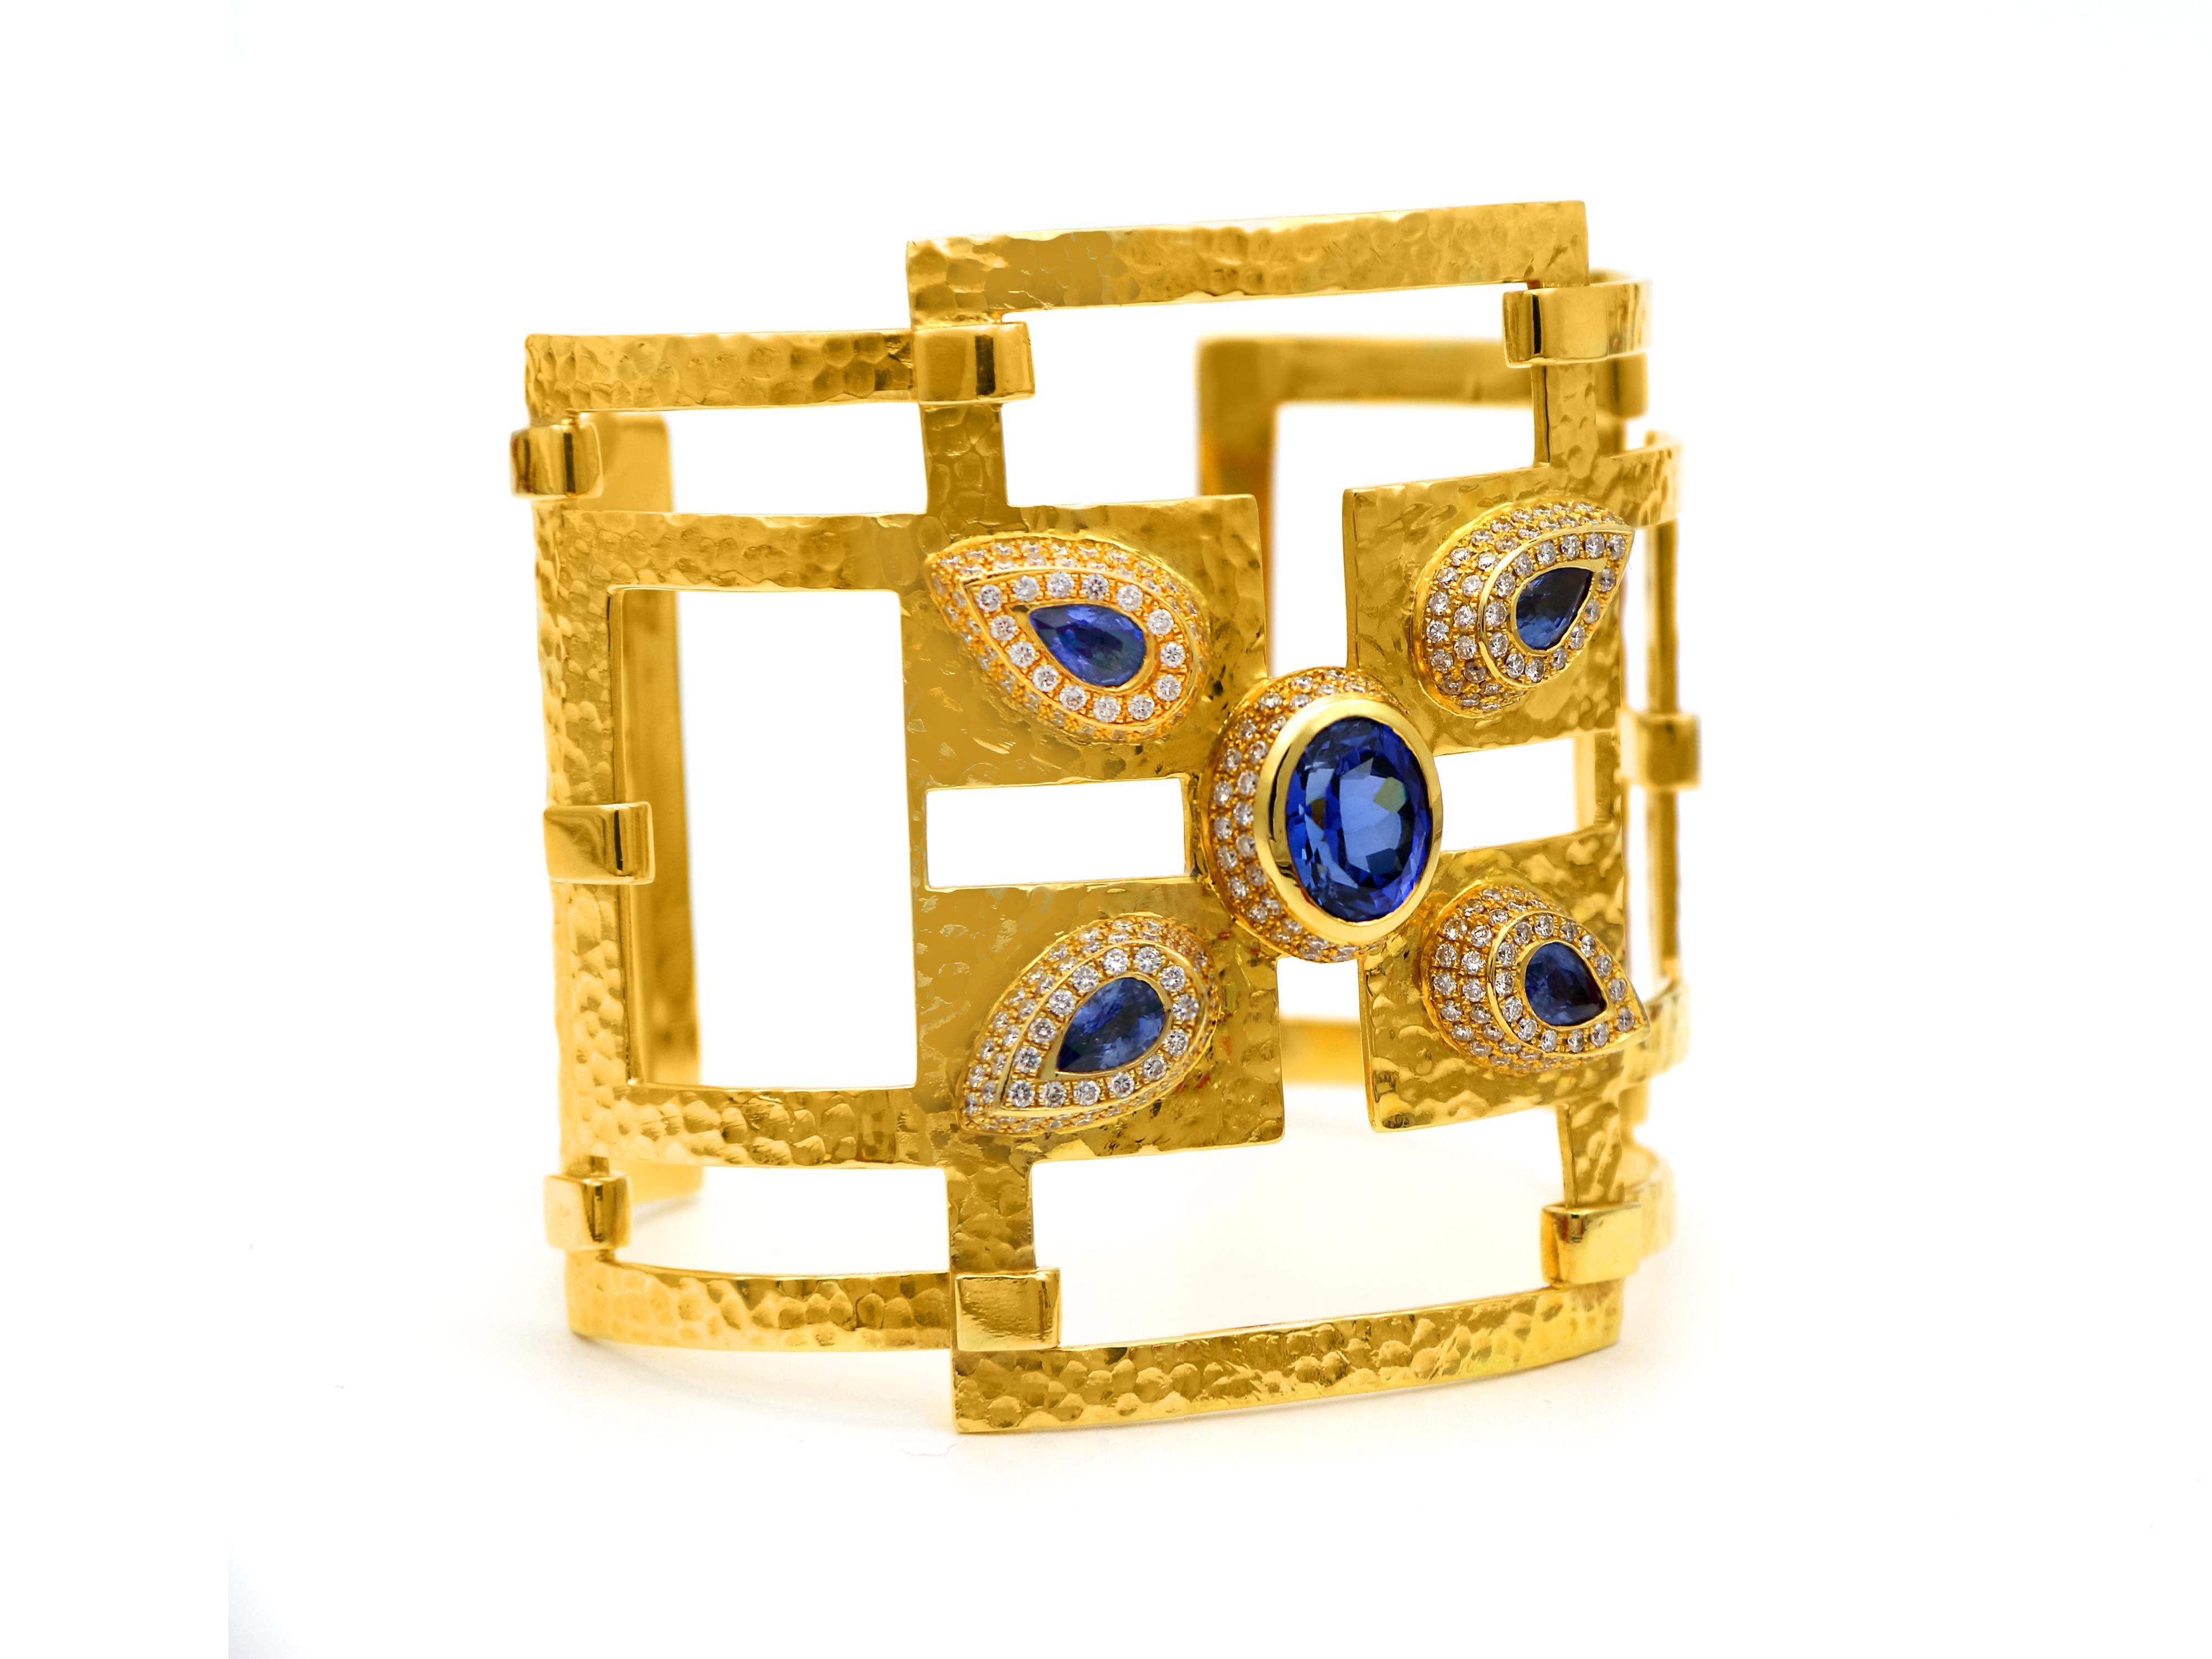 Geometrical inspired bracelet married with a hummer gold workmanship and the attitude of an edgy style. Hosting an oval 4.95 carats Tanzanite and 4  teardrop 1.18 carats Ceylon sapphires. A very wide bangle bracelet with a beautiful finish a